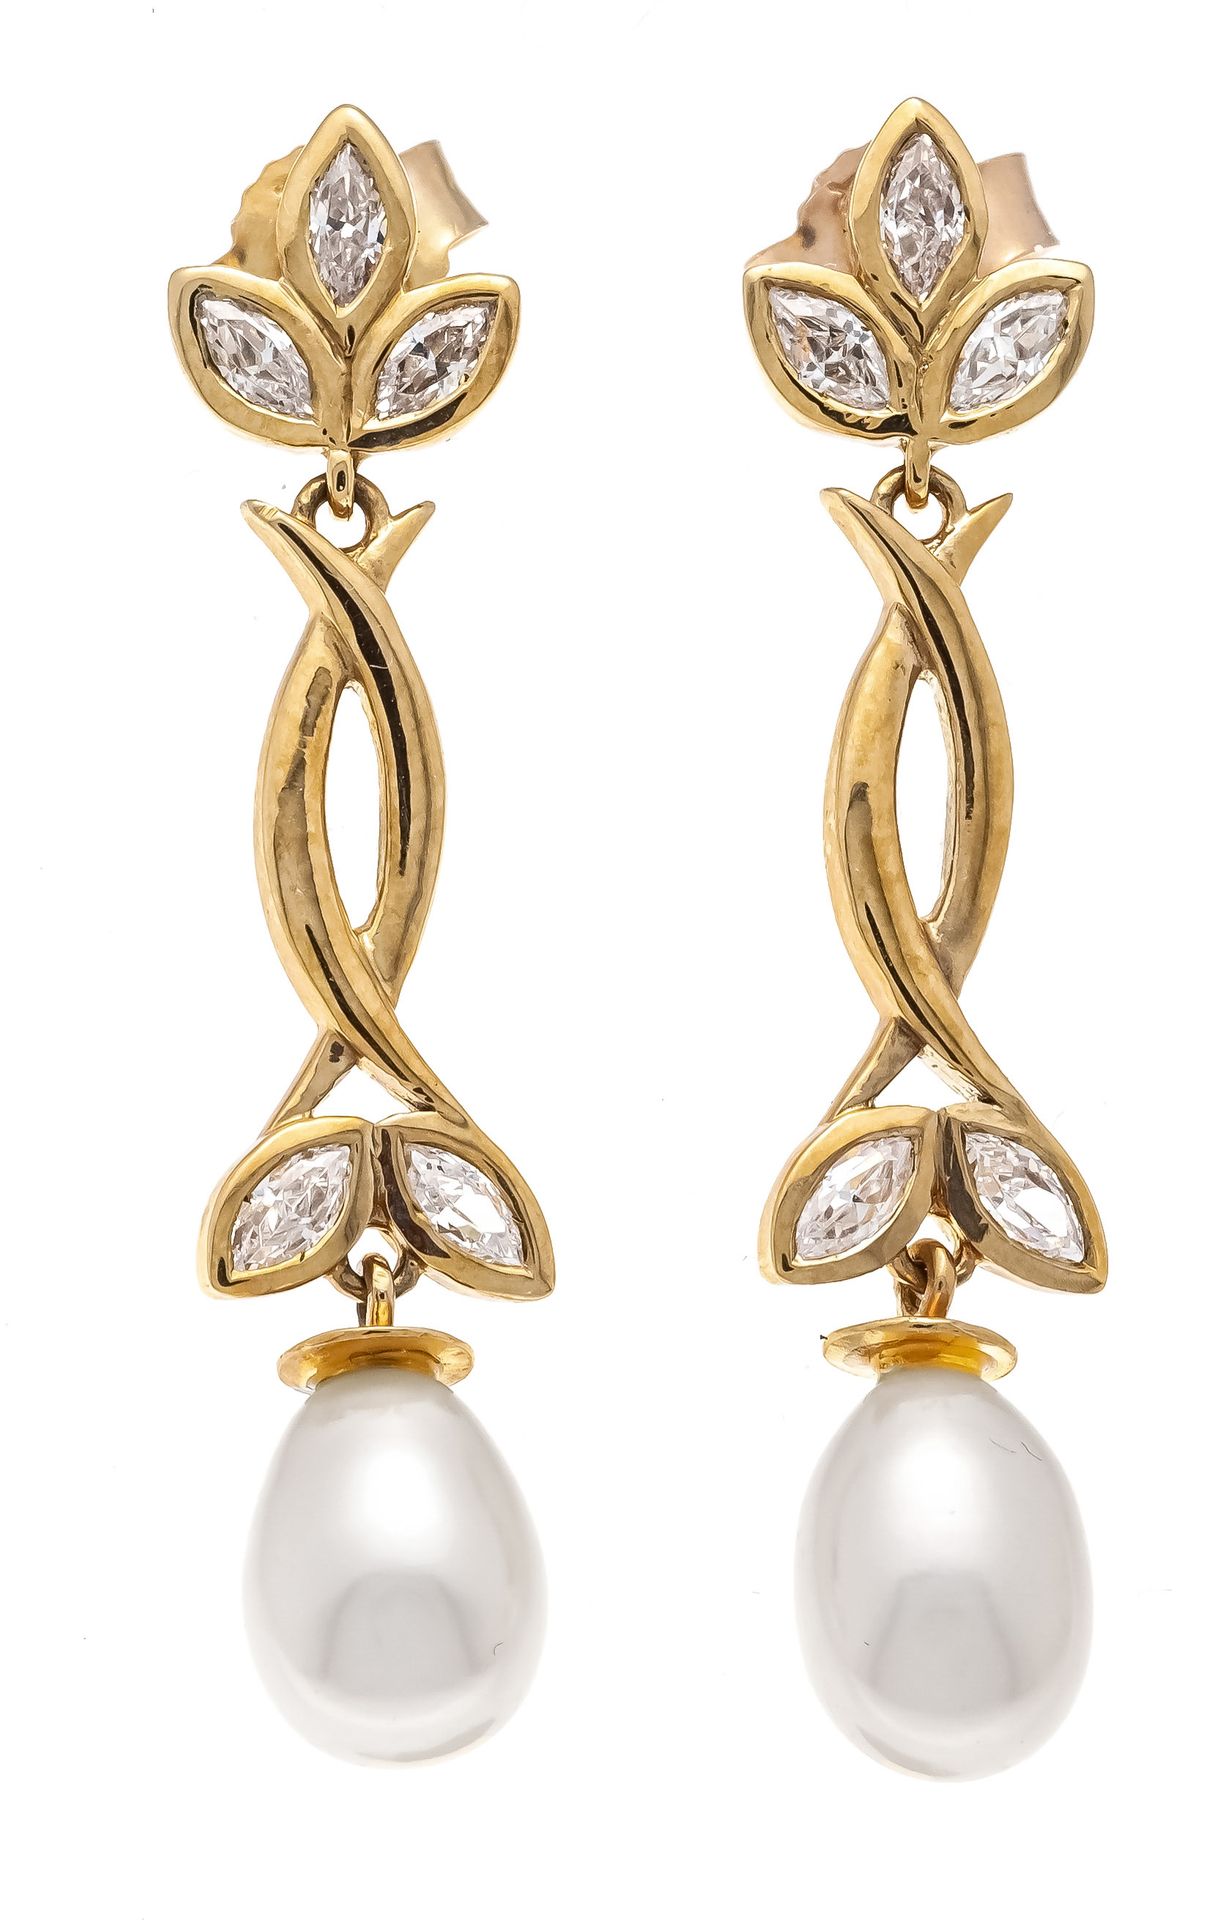 Null Pearl earrings GG 375/000 with one drop-shaped cultured pearl 10 x 6 mm and&hellip;